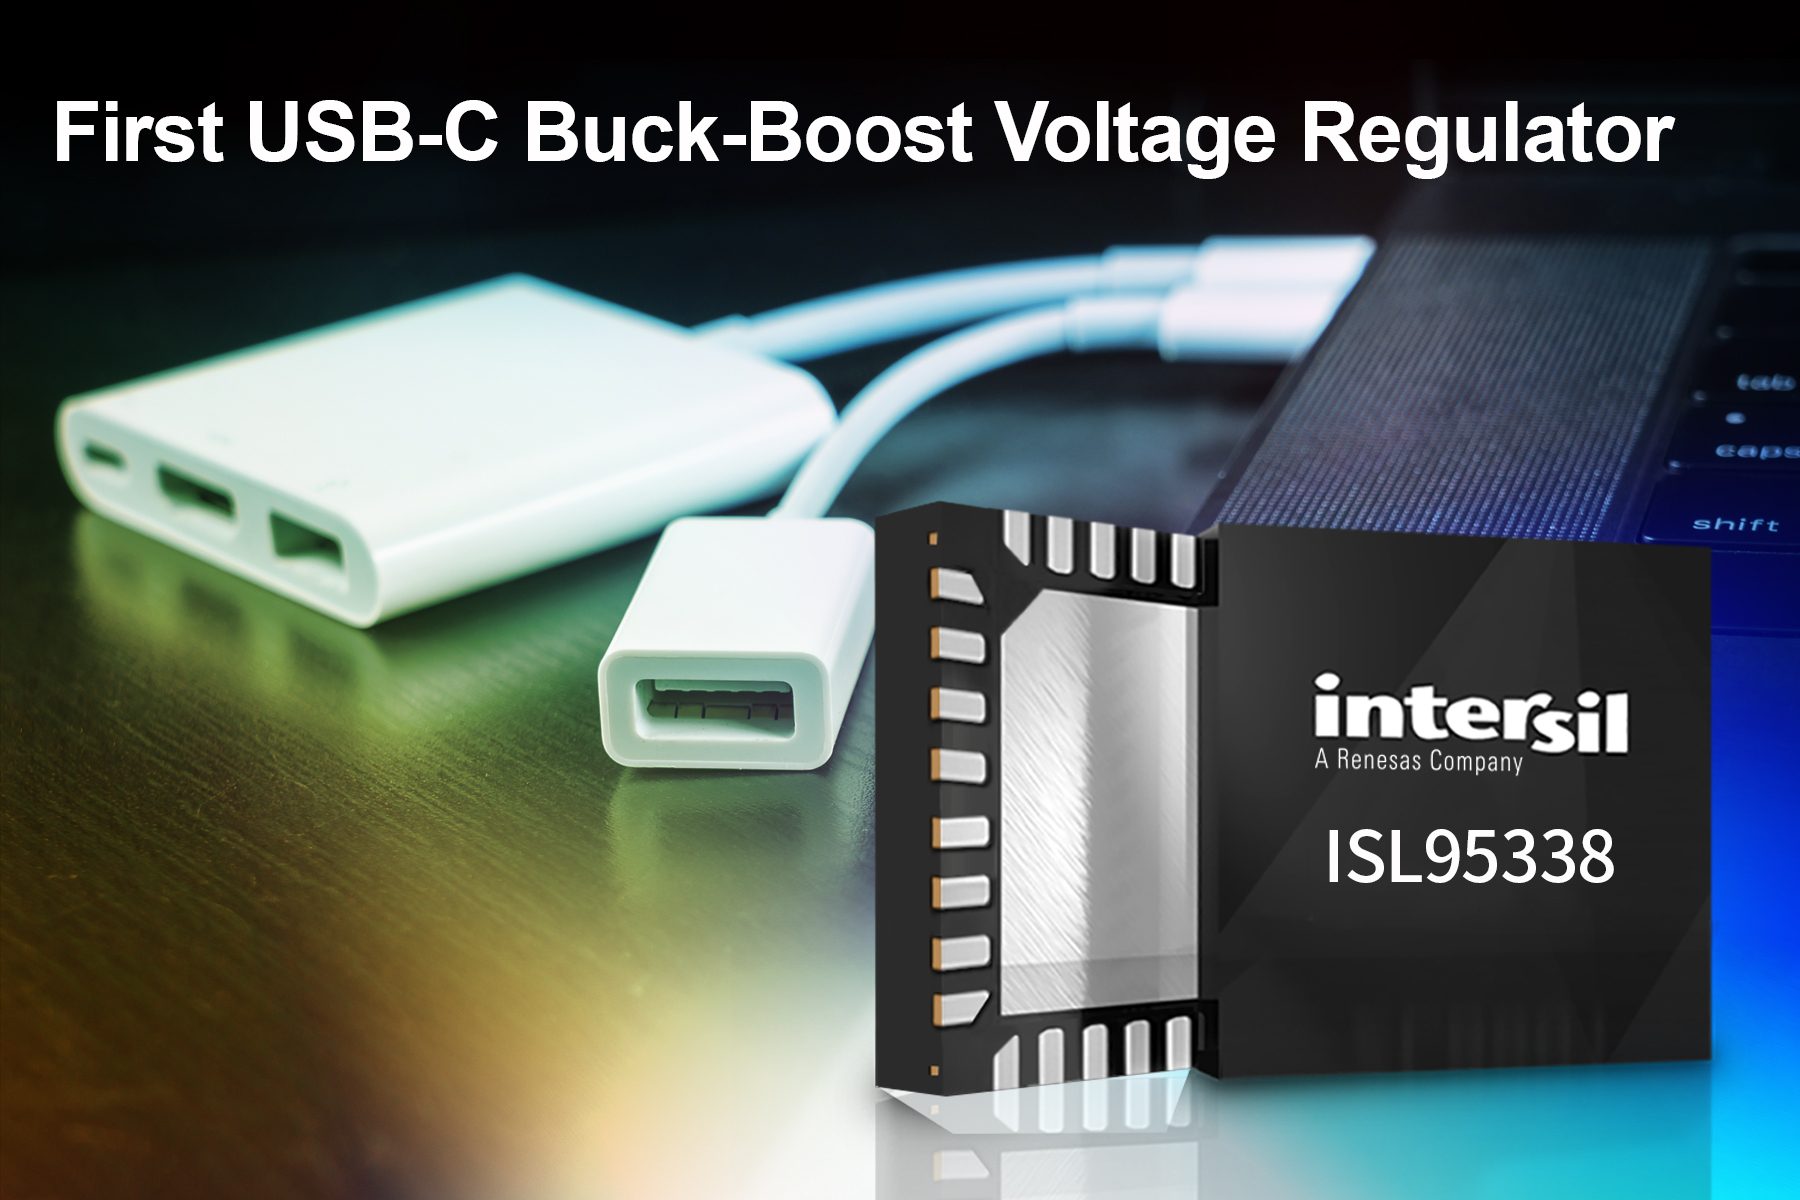 Single-chip ISL95338 Replaces two Converters, Enables USB PD3.0 Bidirectional Voltage Regulation